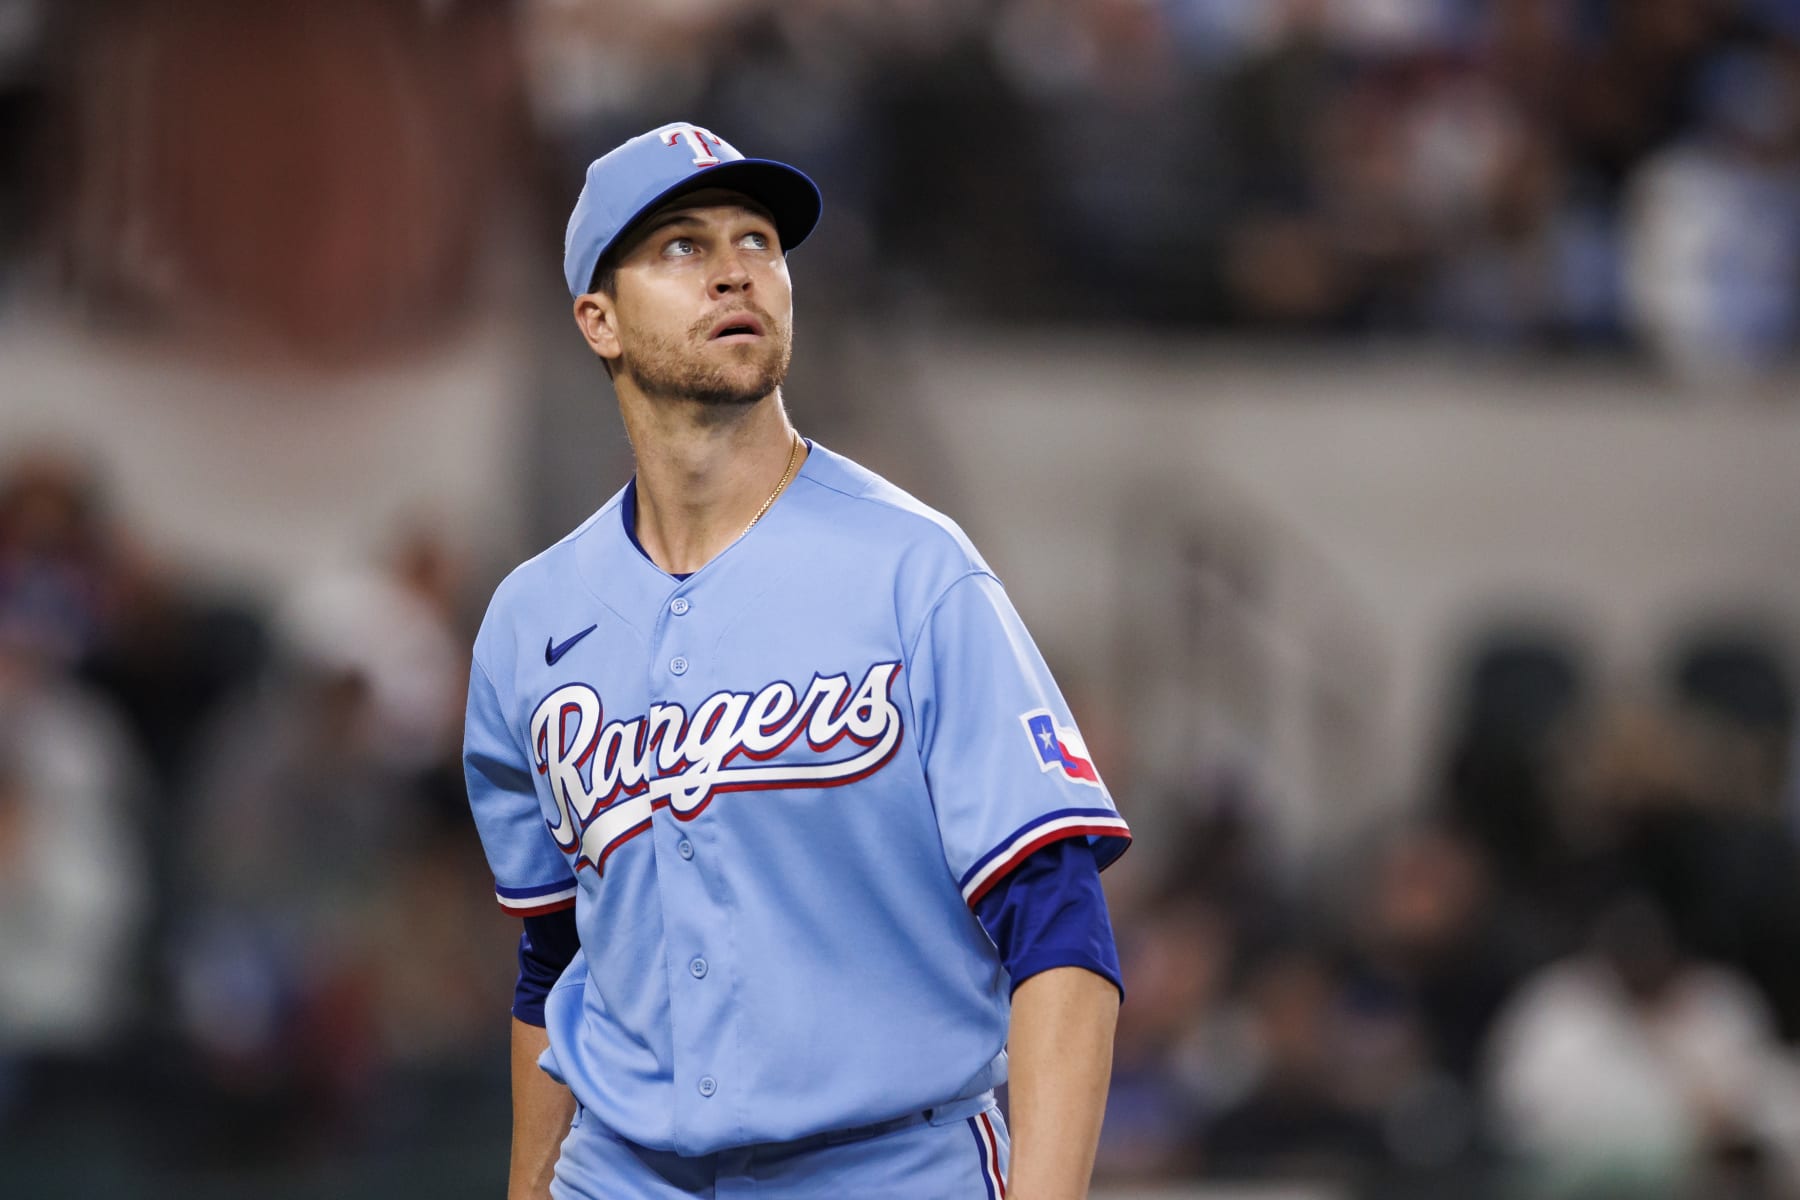 Rangers: Trades after Jacob deGrom Tommy John surgery update